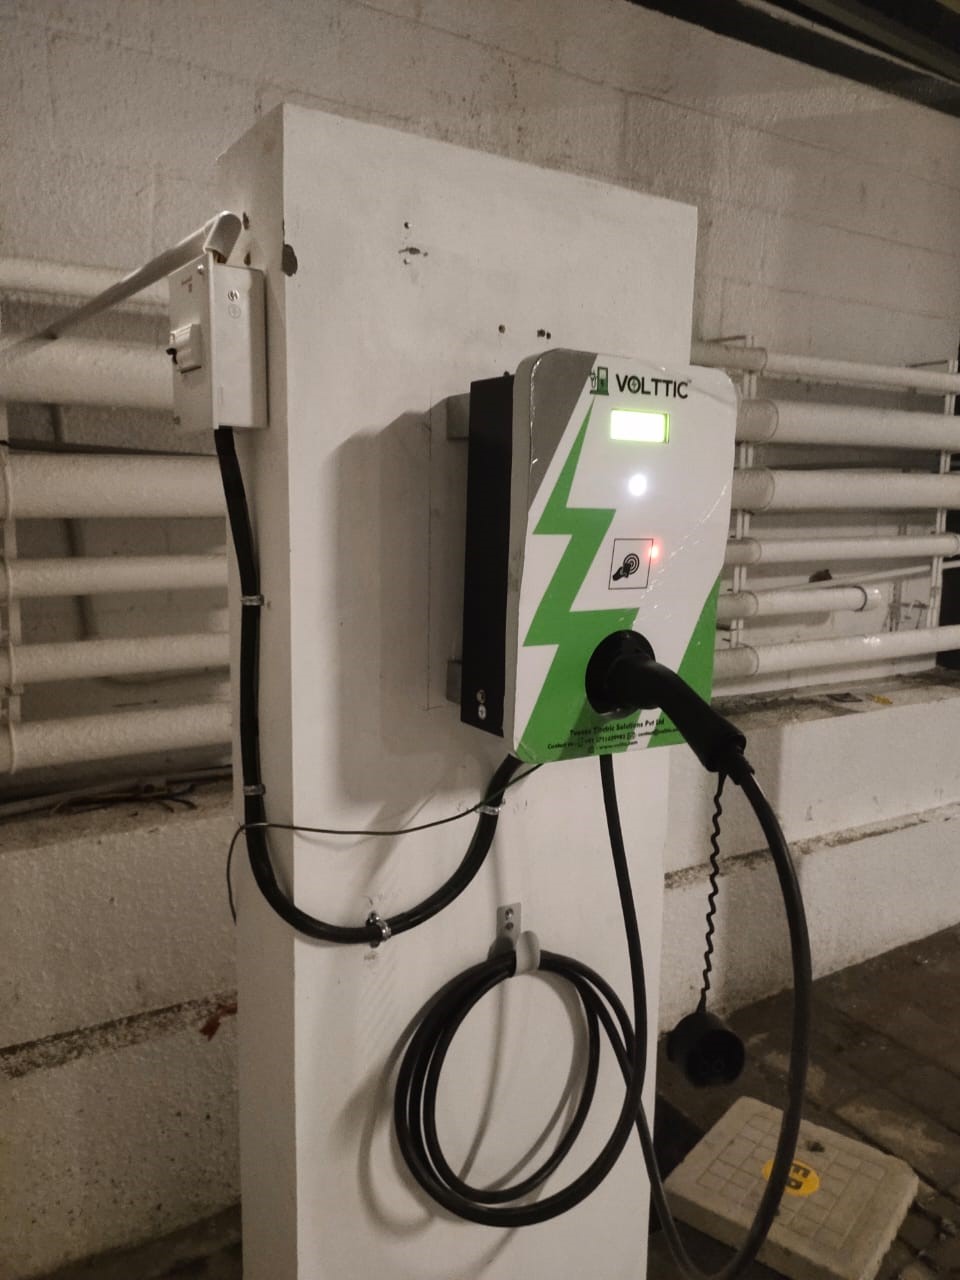 Volttic installed 22 KW AC type 2 Electric Vehicle charger at